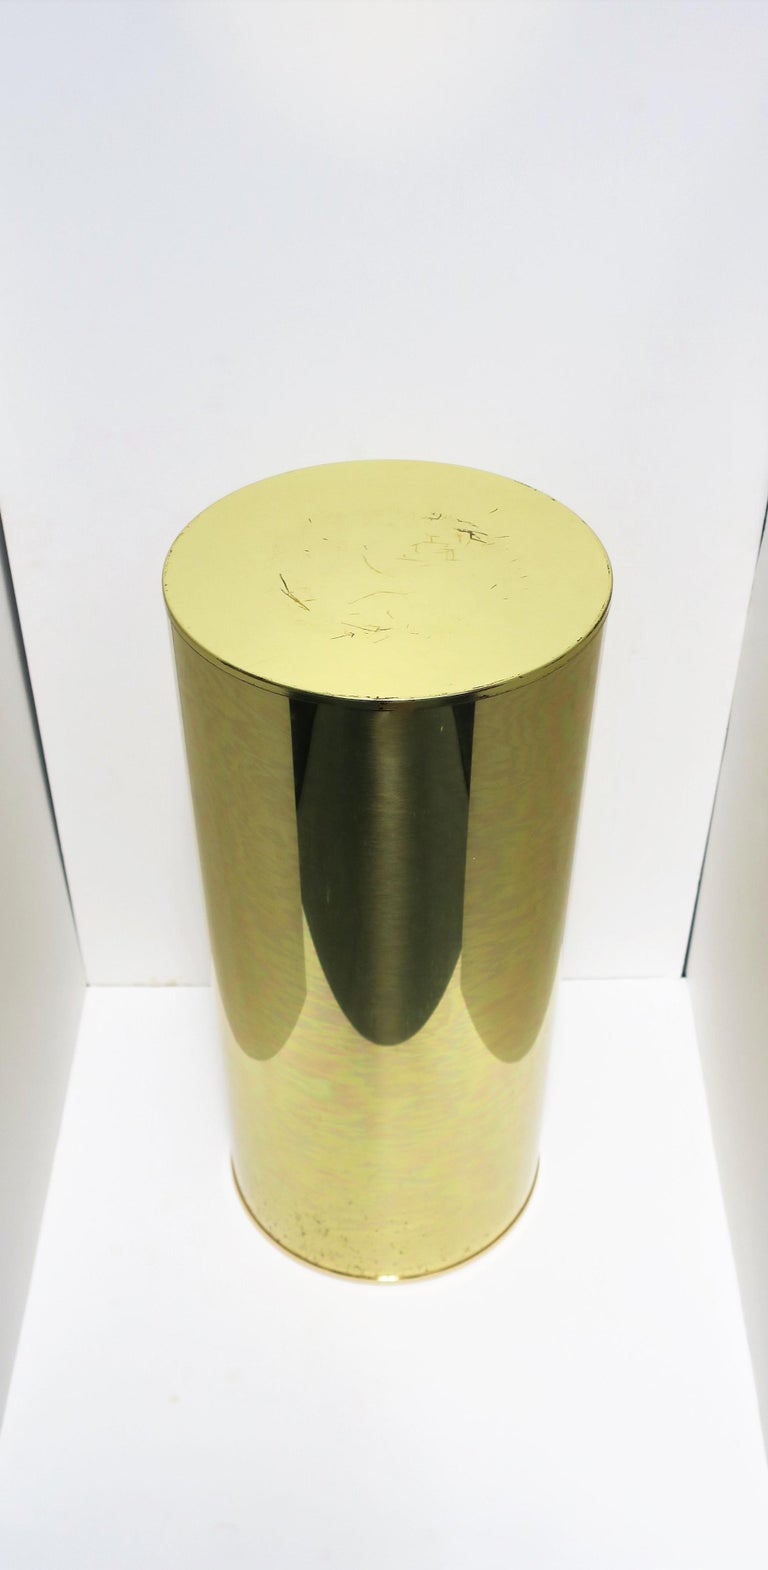 Late 20th Century Modern Brass Pedestal Column Pillar Stand Signed by Designers C. Jere For Sale